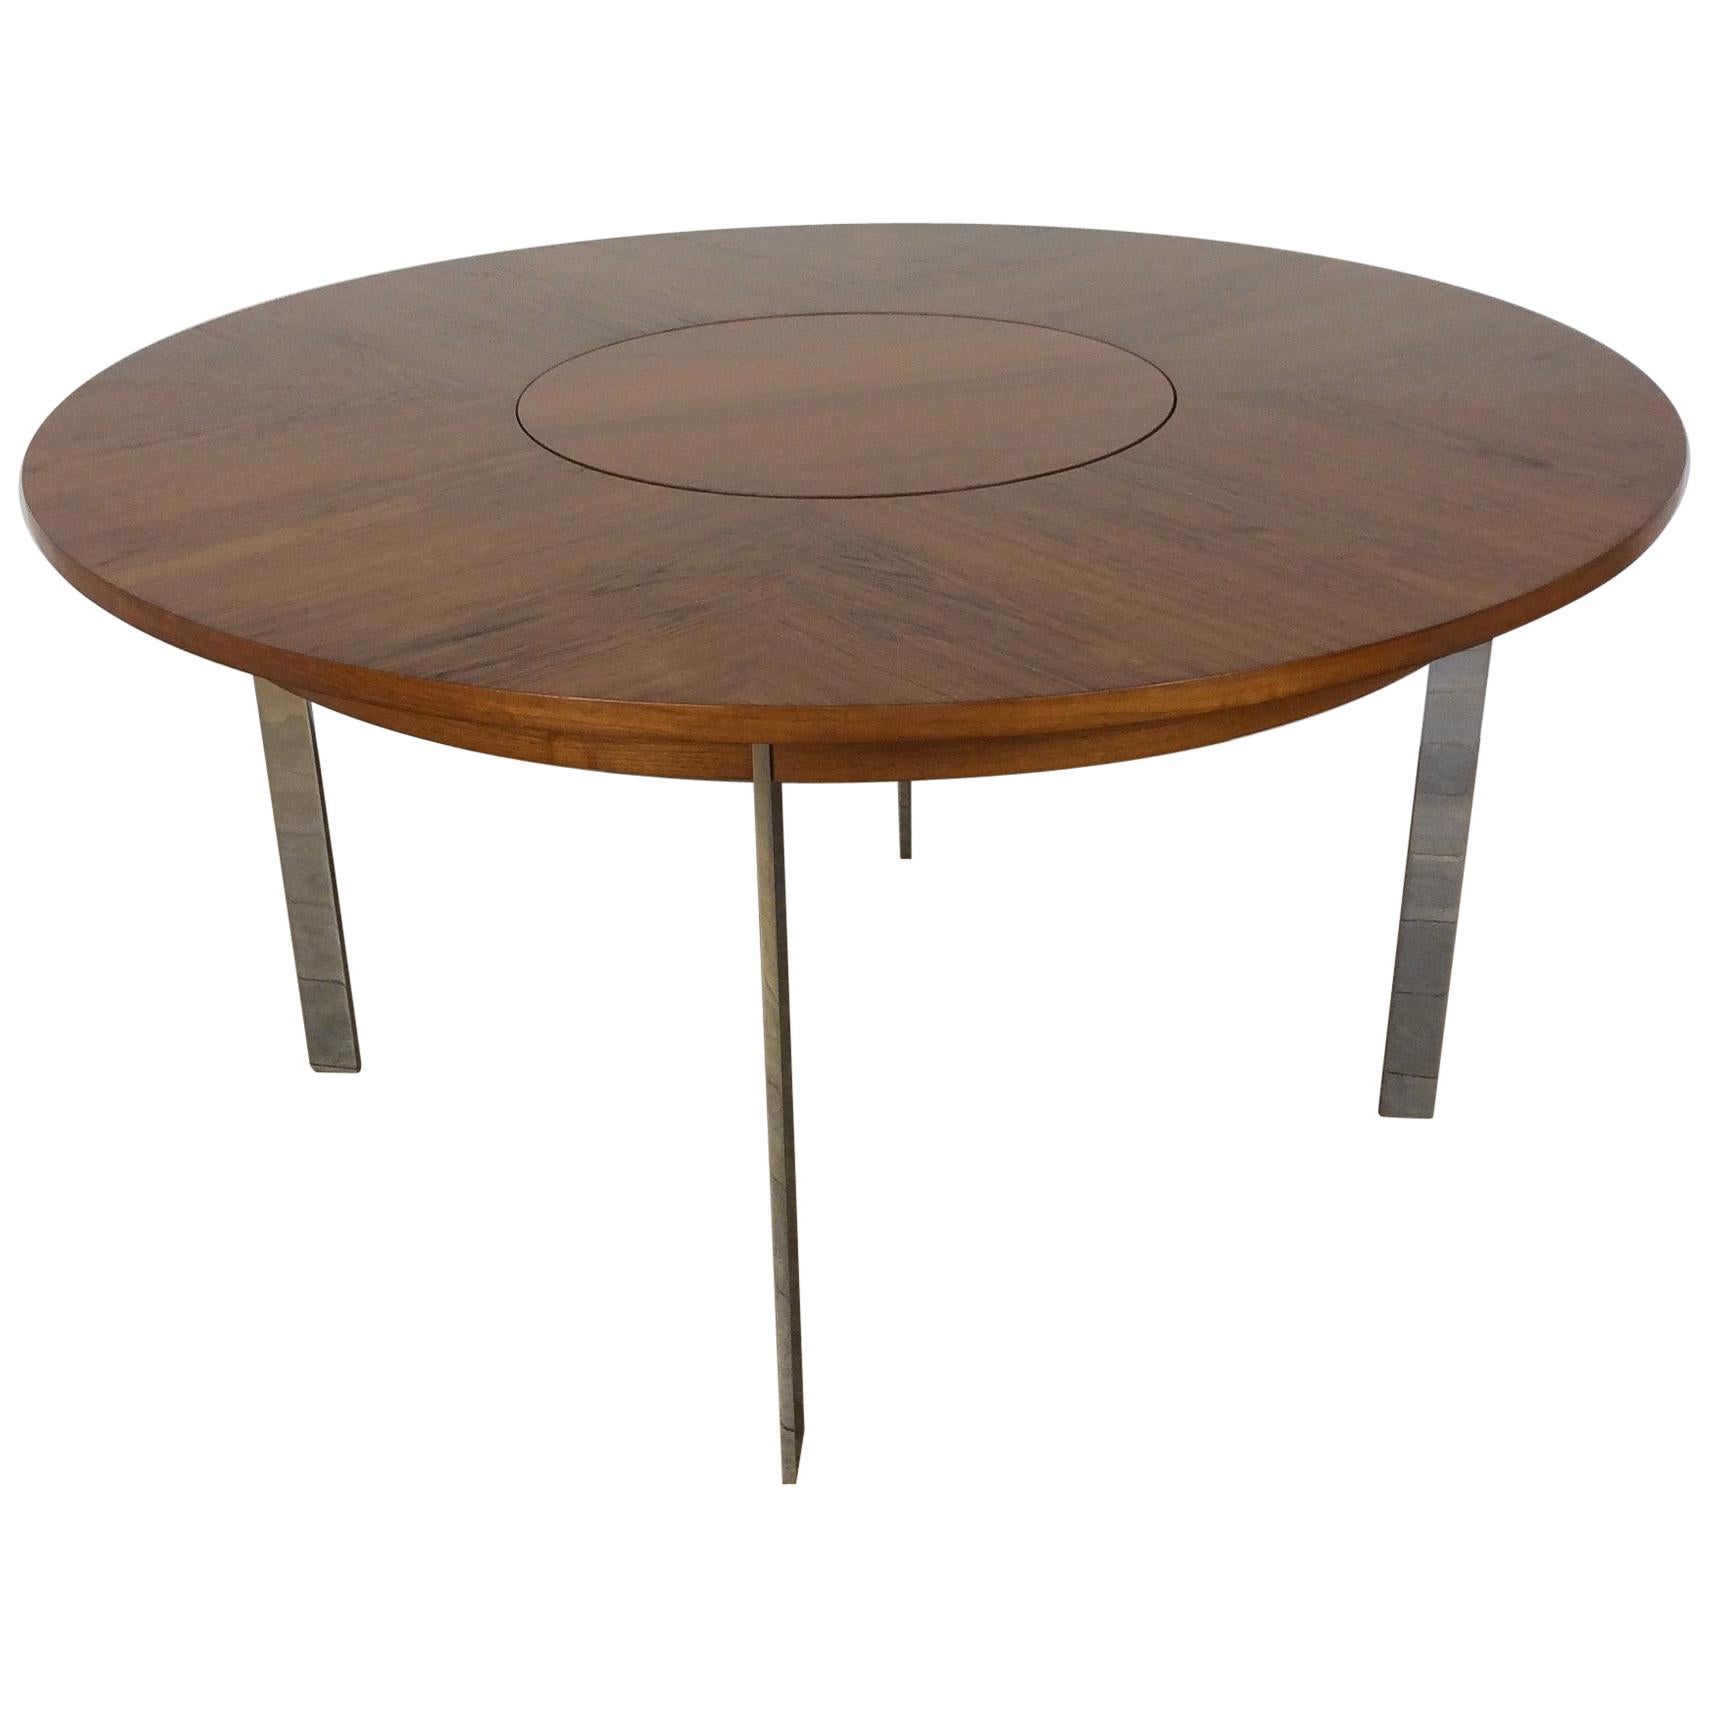 Midcentury Rosewood Dining Table by Merrow Associates